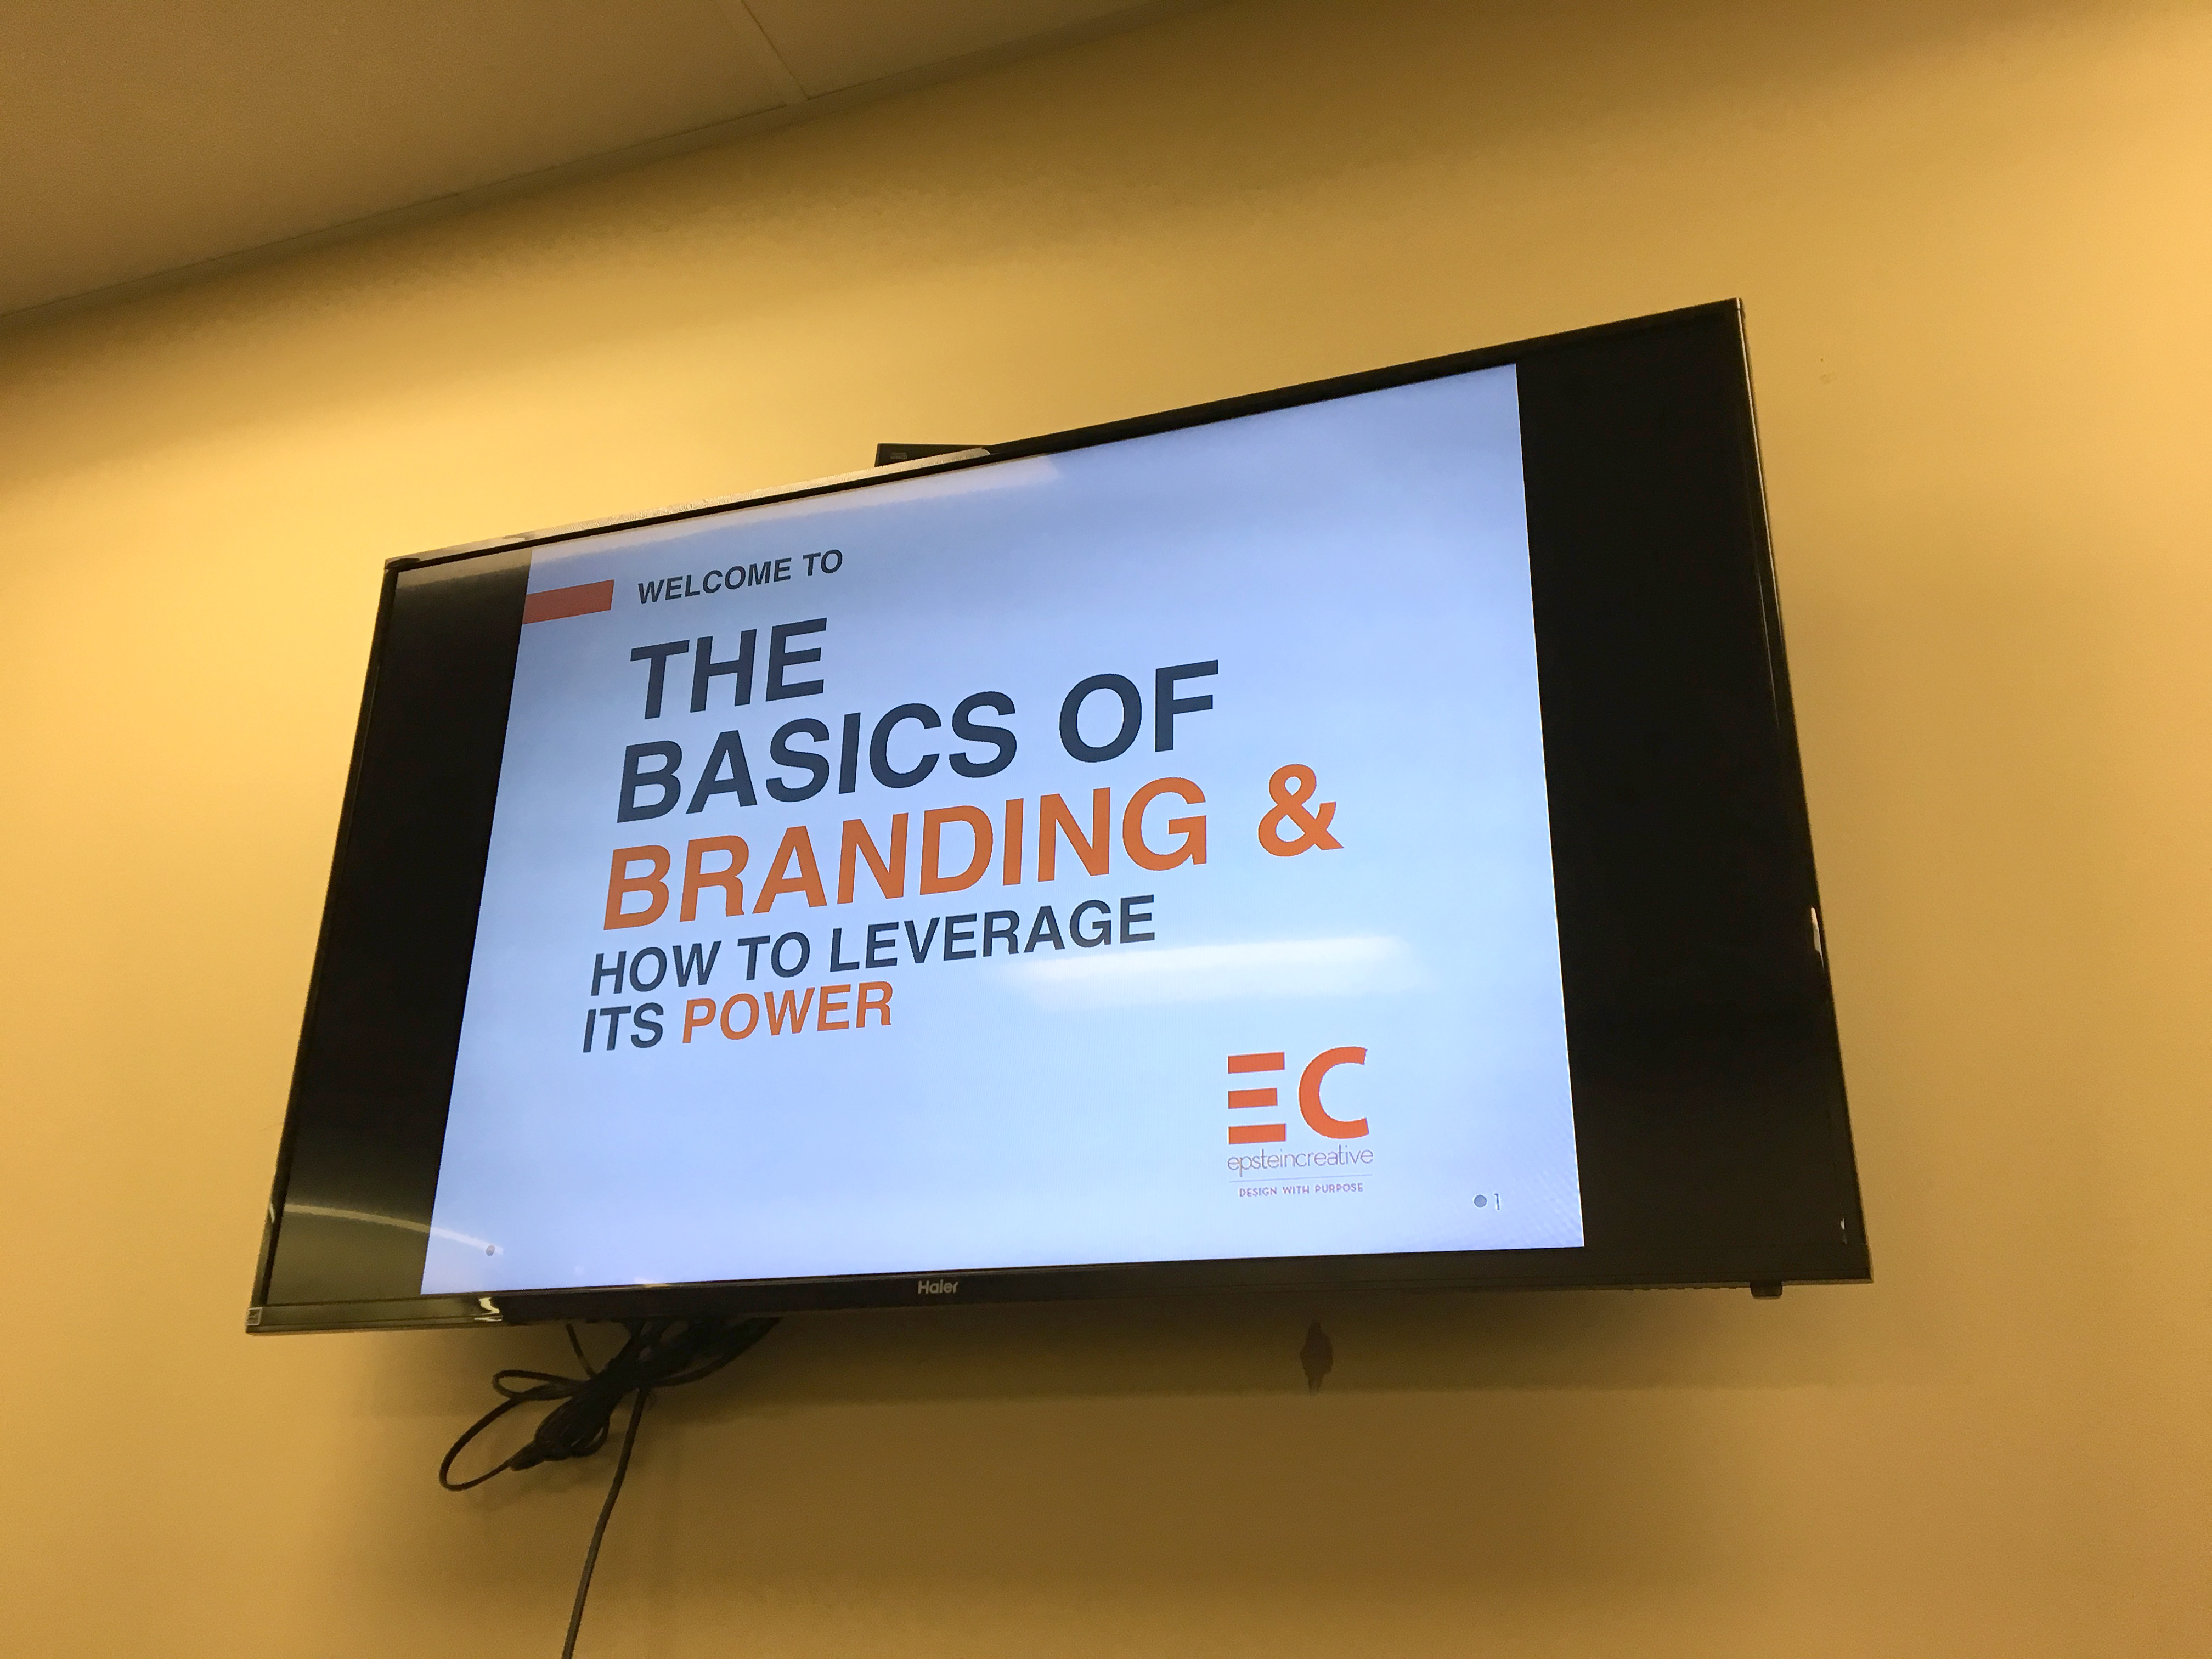 The Basics of Branding & How to Leverage its Power